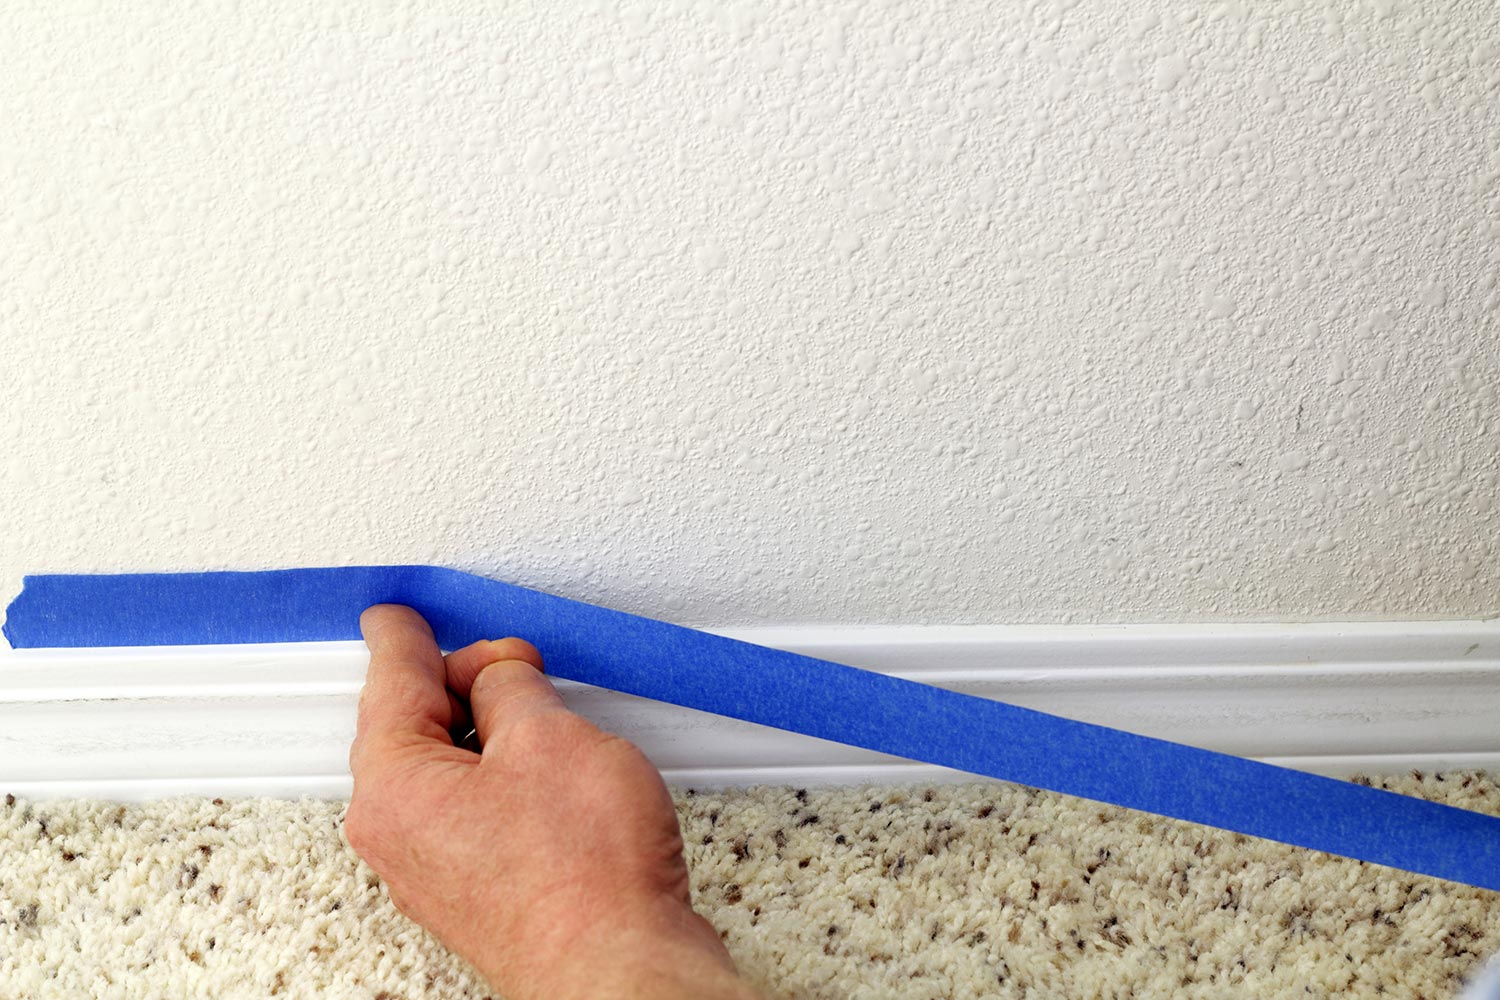 Male hand preparing to paint wall trim by placing blue painter's tape on the wall above it for protection.